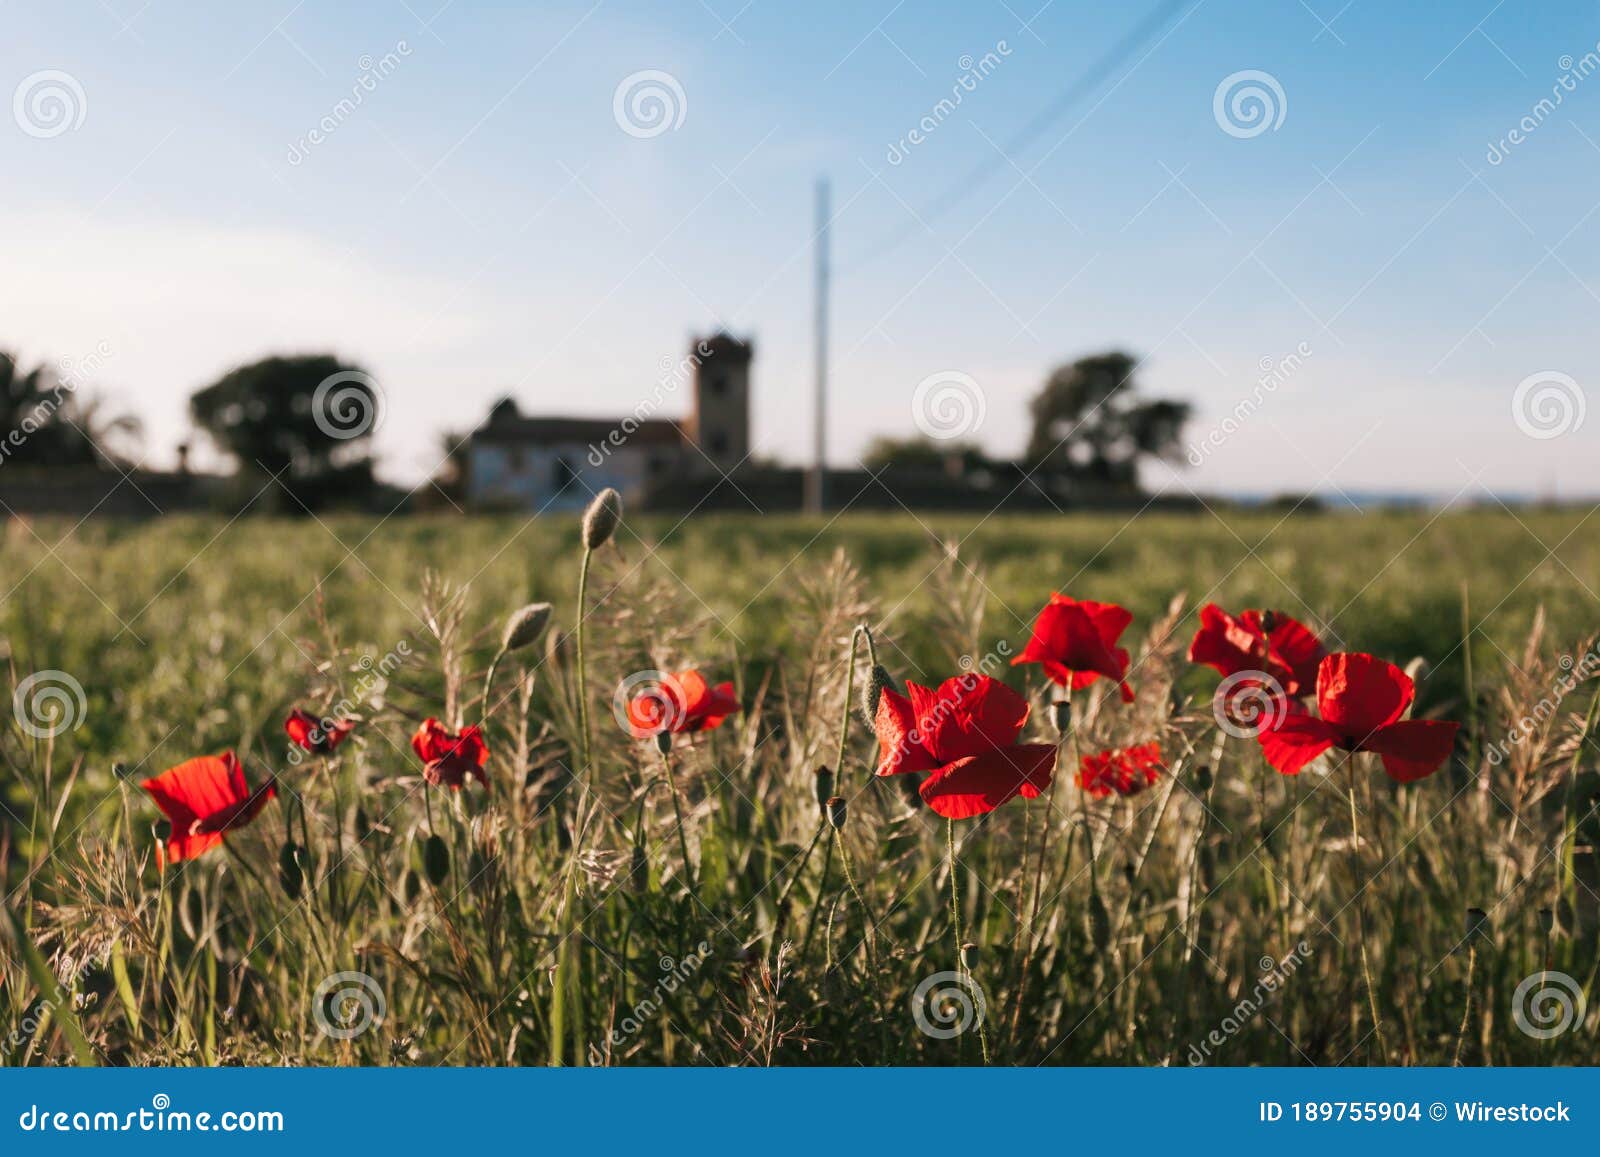 beautiful view of red shirley poppy flowers in the field of montilla, espaÃÂ±a